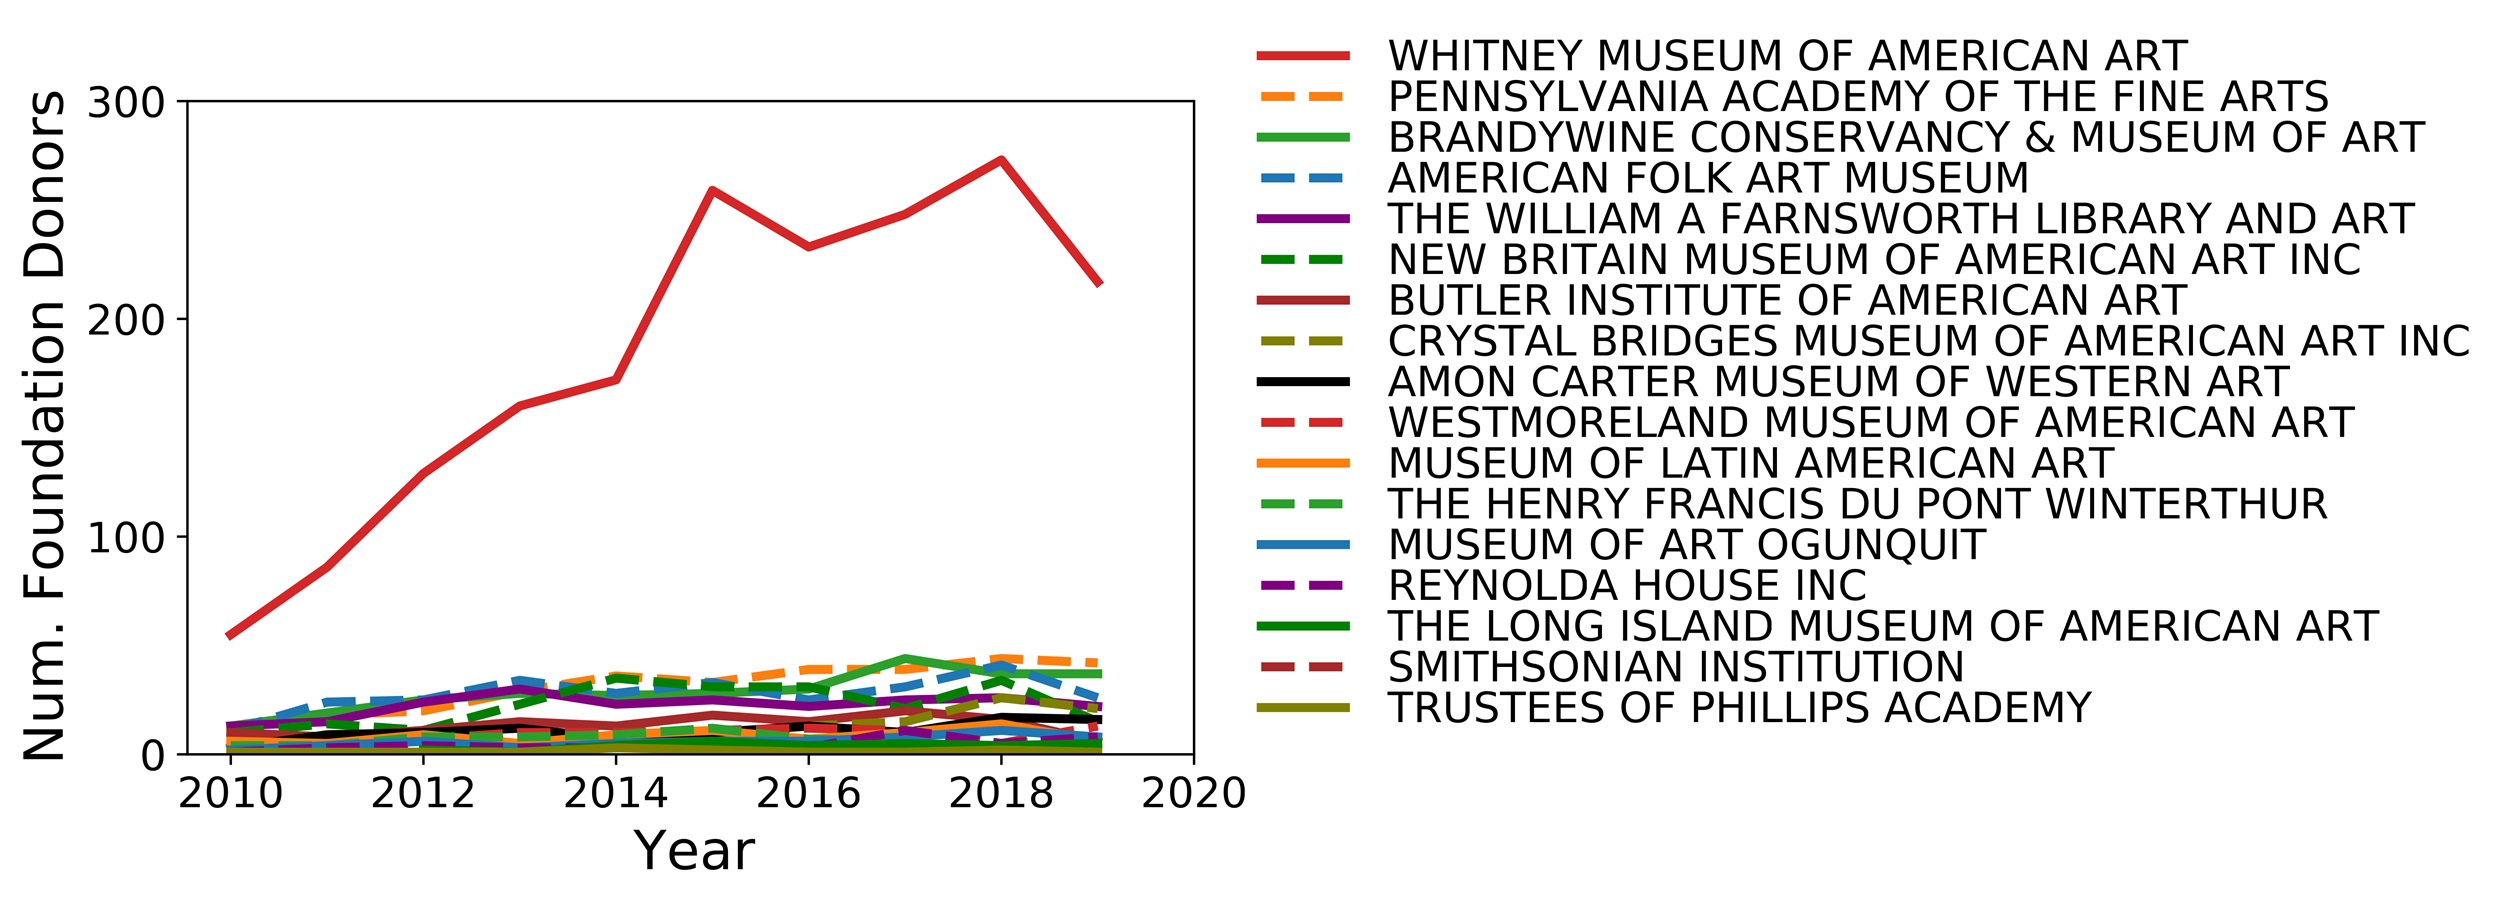 Line graph with "Num. Foundation Donors" labeling the Y axis, and the years 2010, 2012, 2014, 2016, 2018, and 2020 labeling the Y axis. The legend lists several museums, with the Whitney Museum of American Art at the top. The graph conveys that the Whitney's number of Foundation donors far exceeds that of other museums.